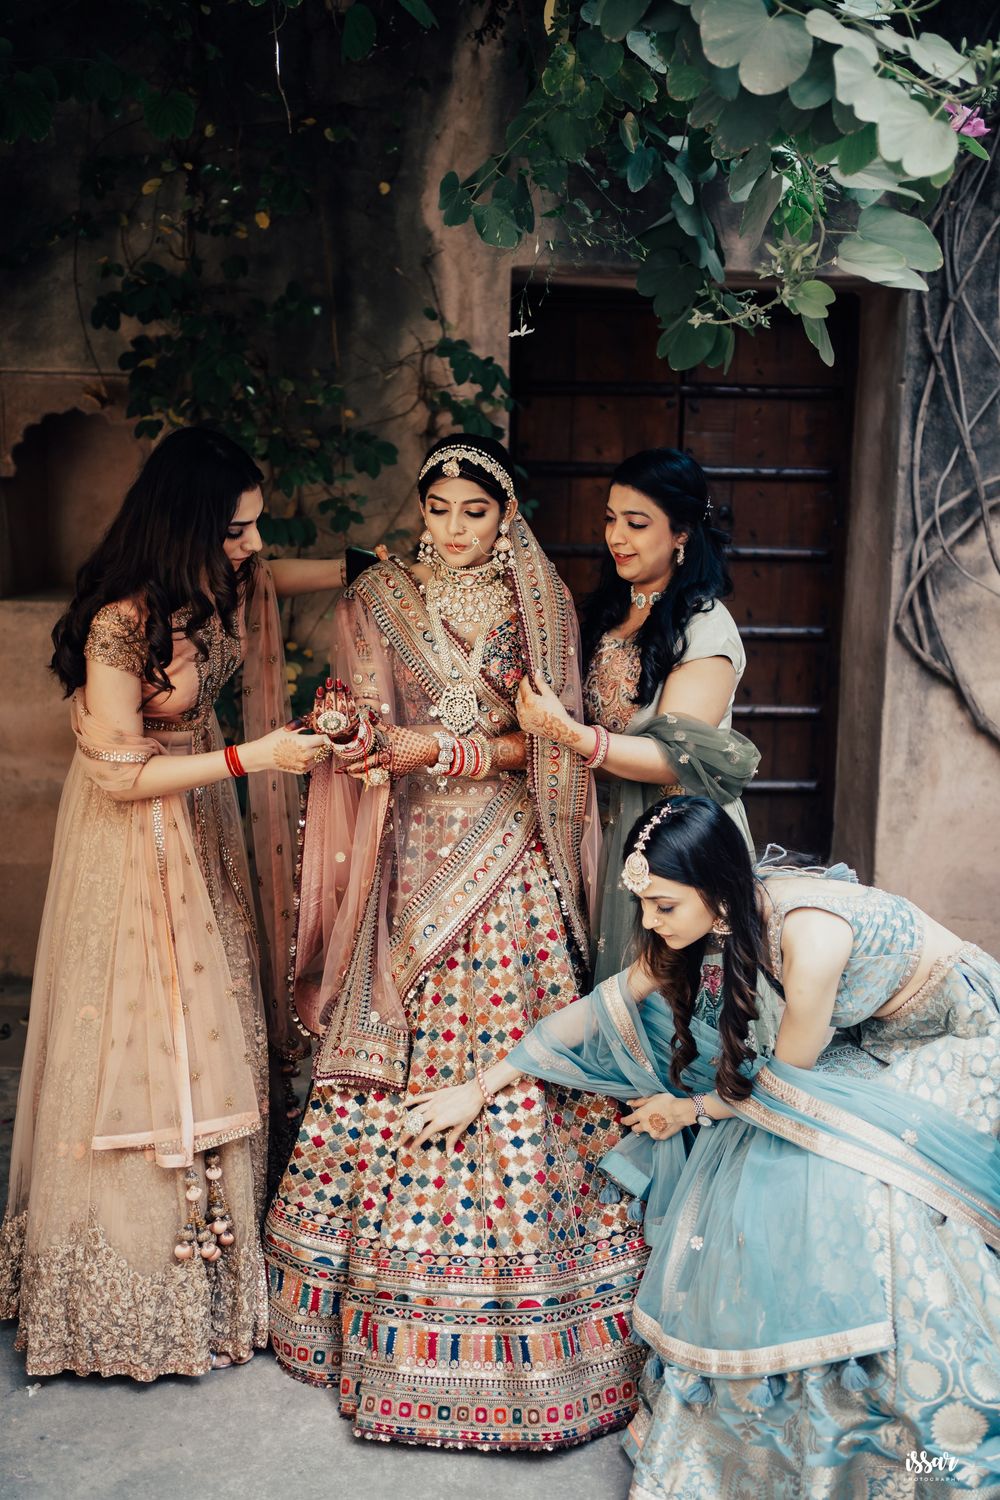 Photo of Bridesmaids helping the bride getting ready for her big day